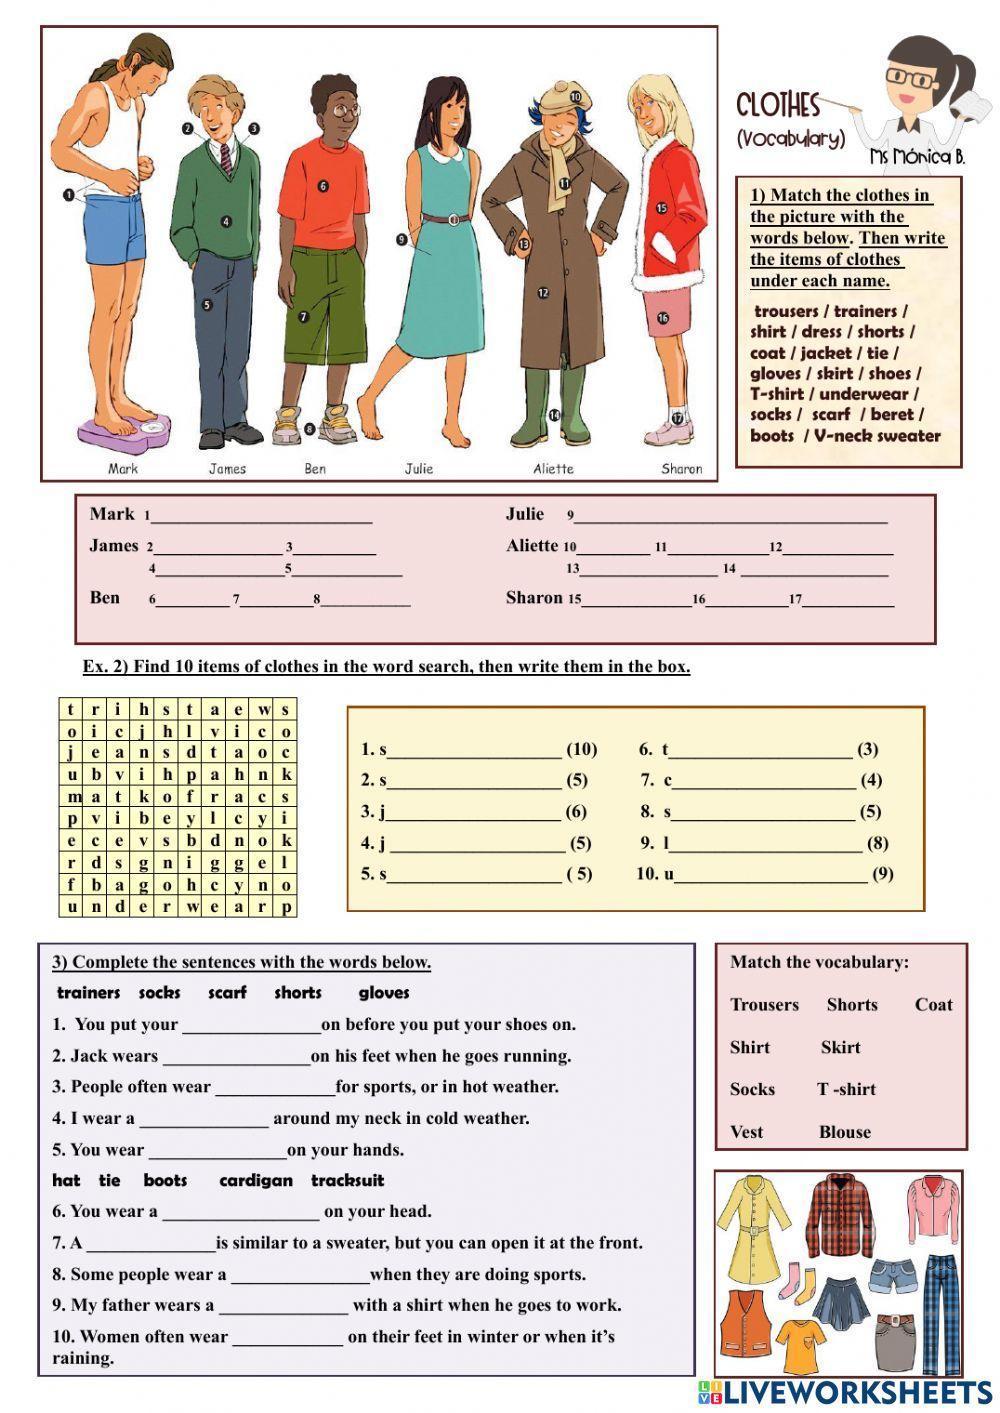 Clothes Vocabulary online worksheet for Intermediate